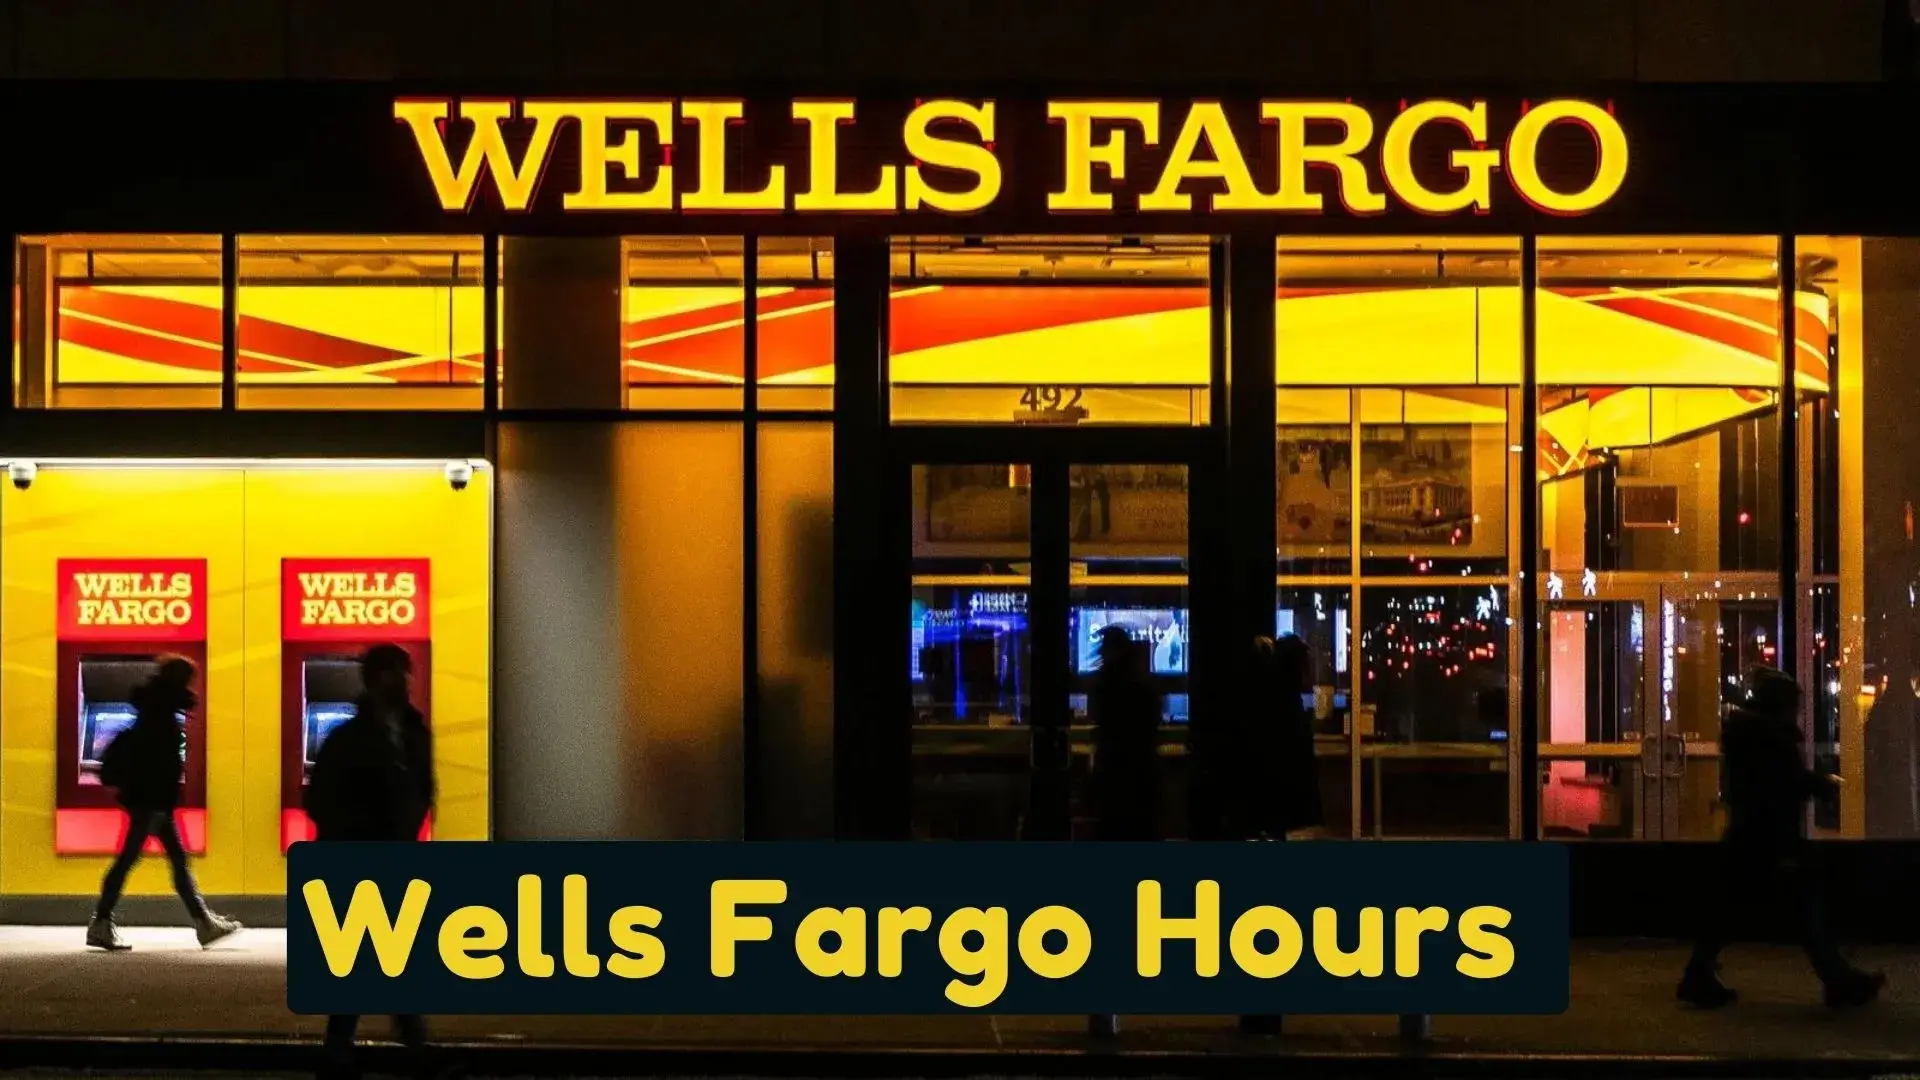 What Time Does Wells Fargo Open And Close Today?